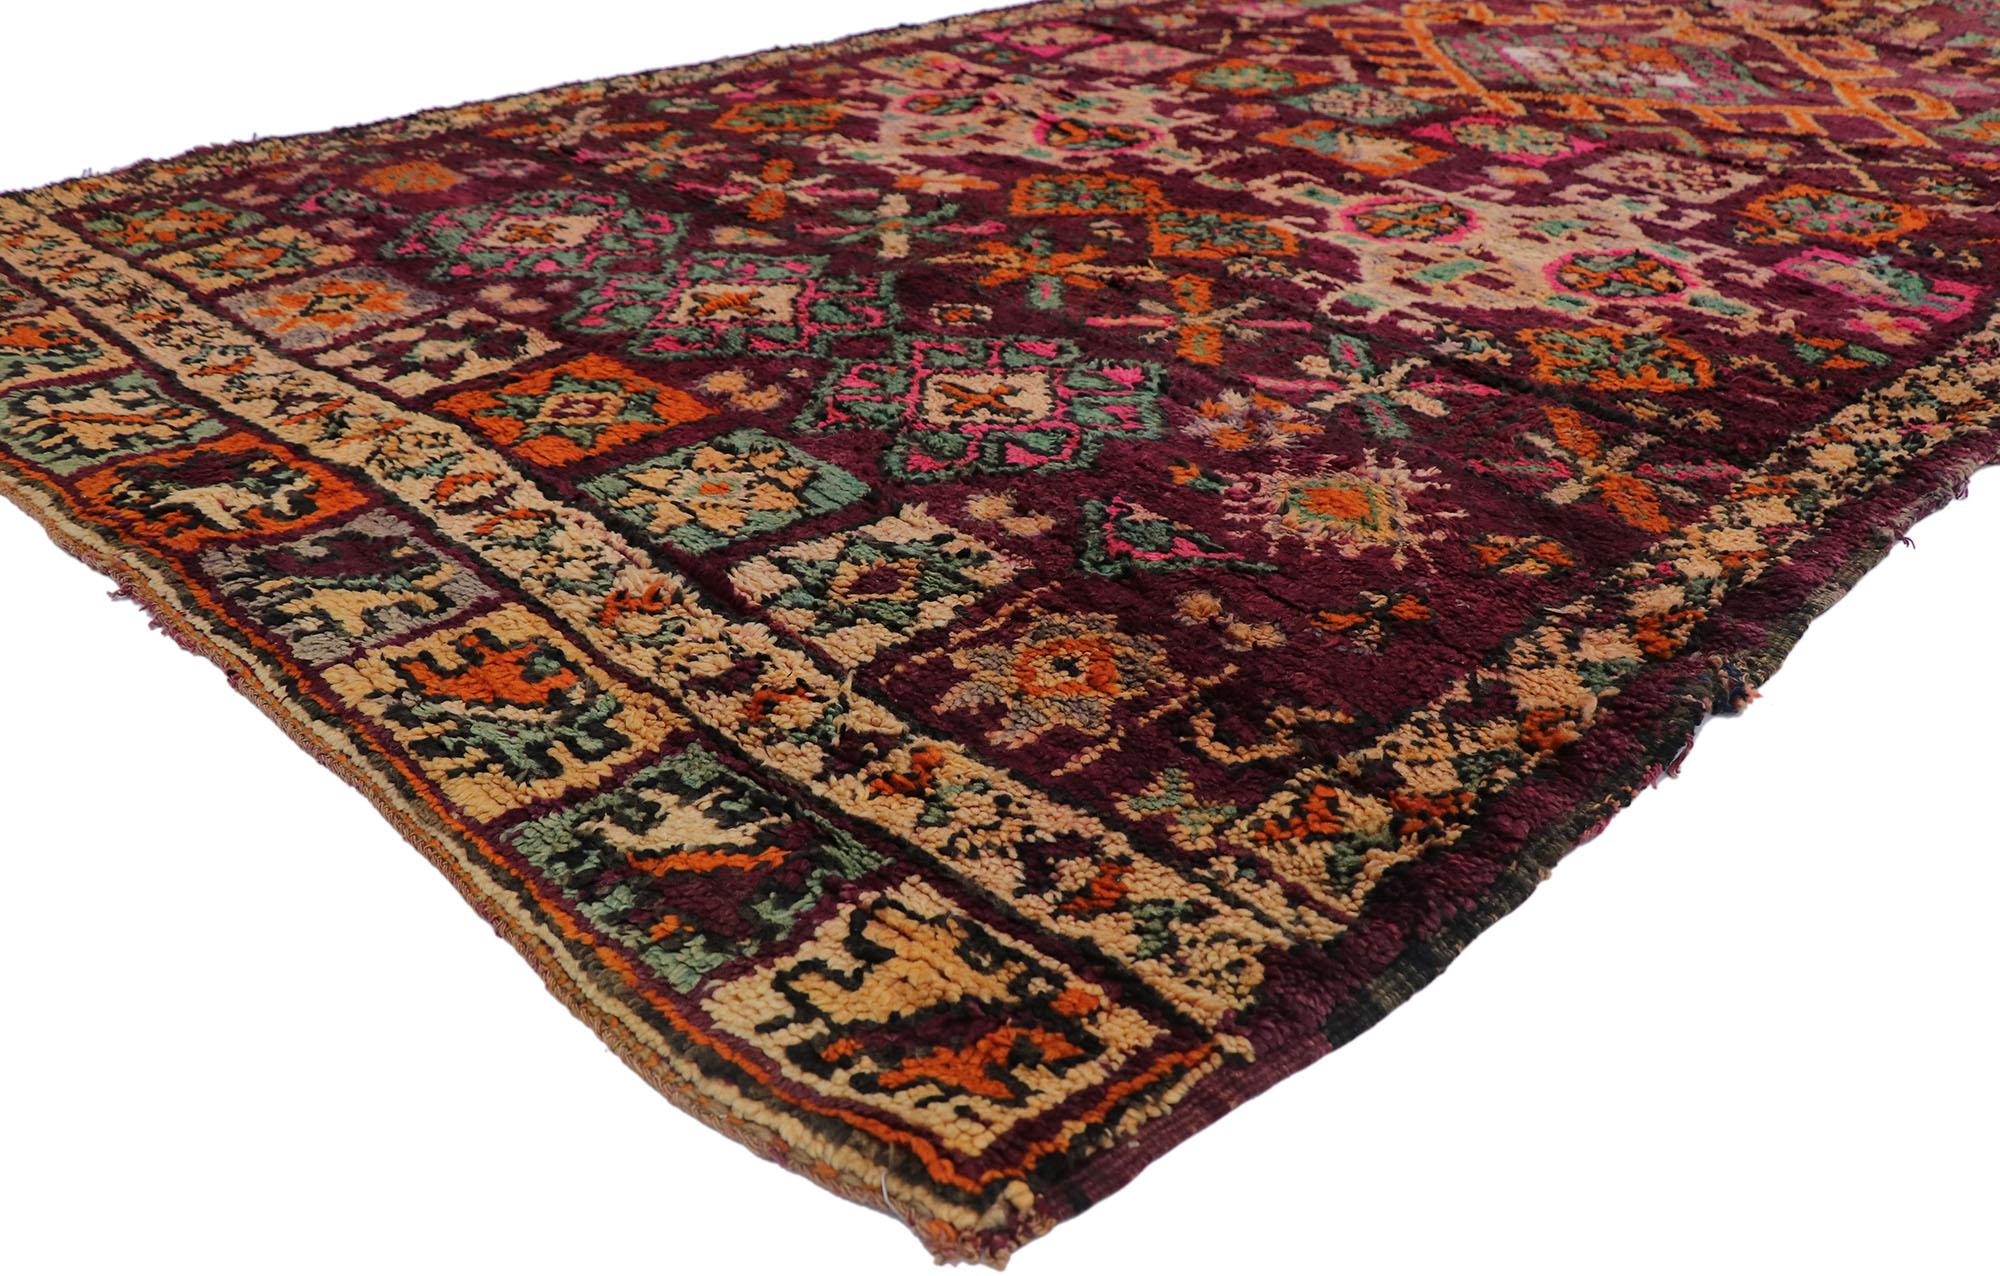 21523 Vintage Berber Boujad Moroccan rug with Bohemian Tribal Style 06'02 x 11'06. Showcasing a bold expressive design, incredible detail and texture, this hand knotted wool vintage Berber Boujad Moroccan rug is a captivating vision of woven beauty.